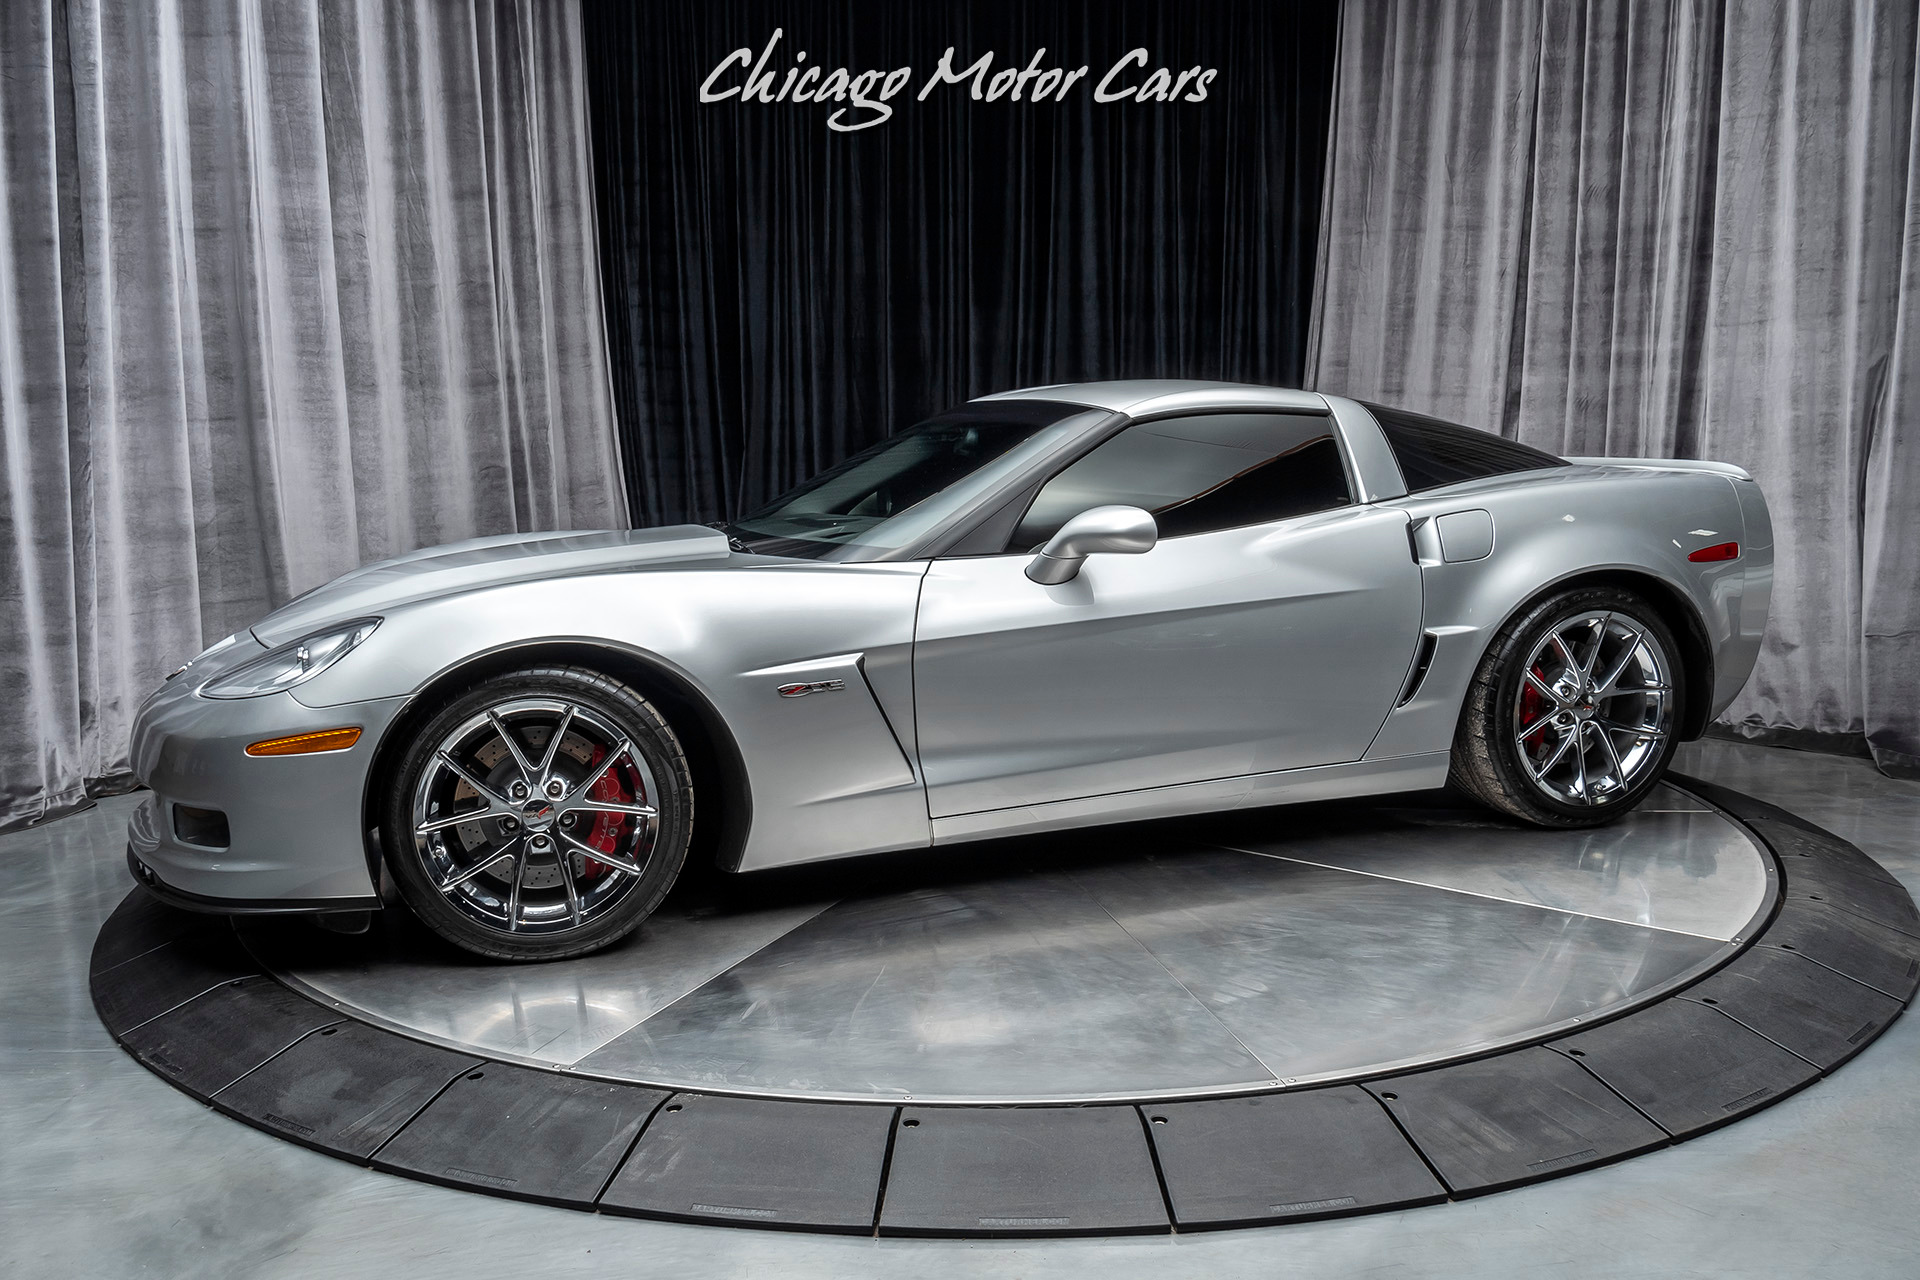 Used 2012 Chevrolet Corvette Z06 1LZ Coupe 6-SPEED MANUAL! SPIDER DESIGN  Z06 CHROME WHEELS! For Sale (Special Pricing) | Chicago Motor Cars Stock  #16328D